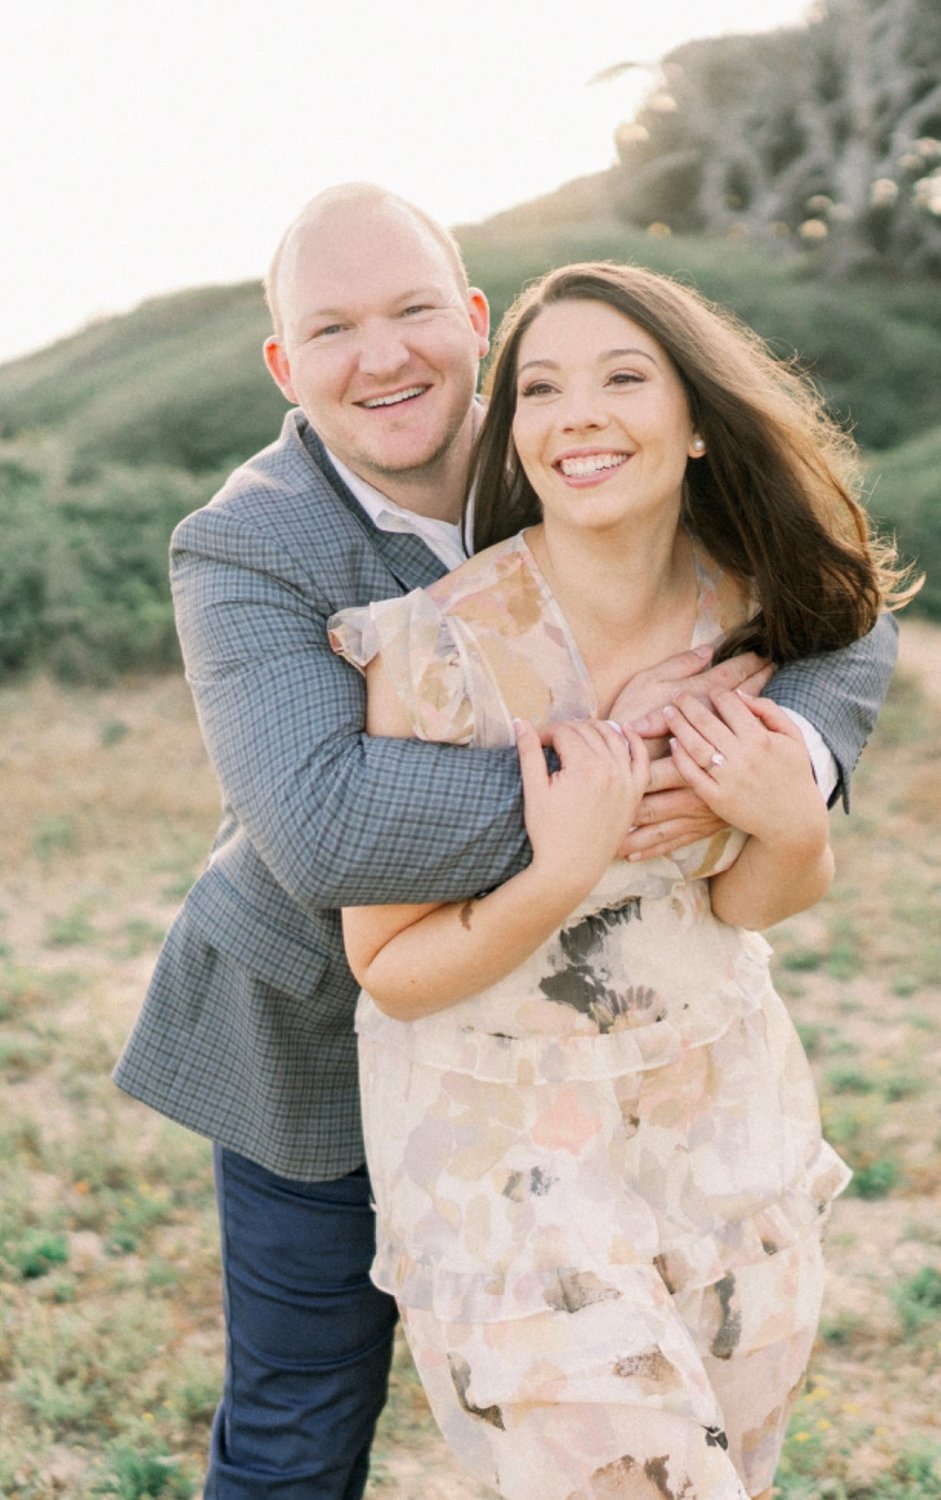 Dr. and Mrs. Myron Strickland of Fayetteville, North Carolina and Mr. and Mrs. Duane DeGaetano of Wilmington, North Carolina are delighted to announce the engagement of their daughter Abby DeGaetano to Ethan Powell, son of Mr. and Mrs. David Powell of Burlington, North Carolina.